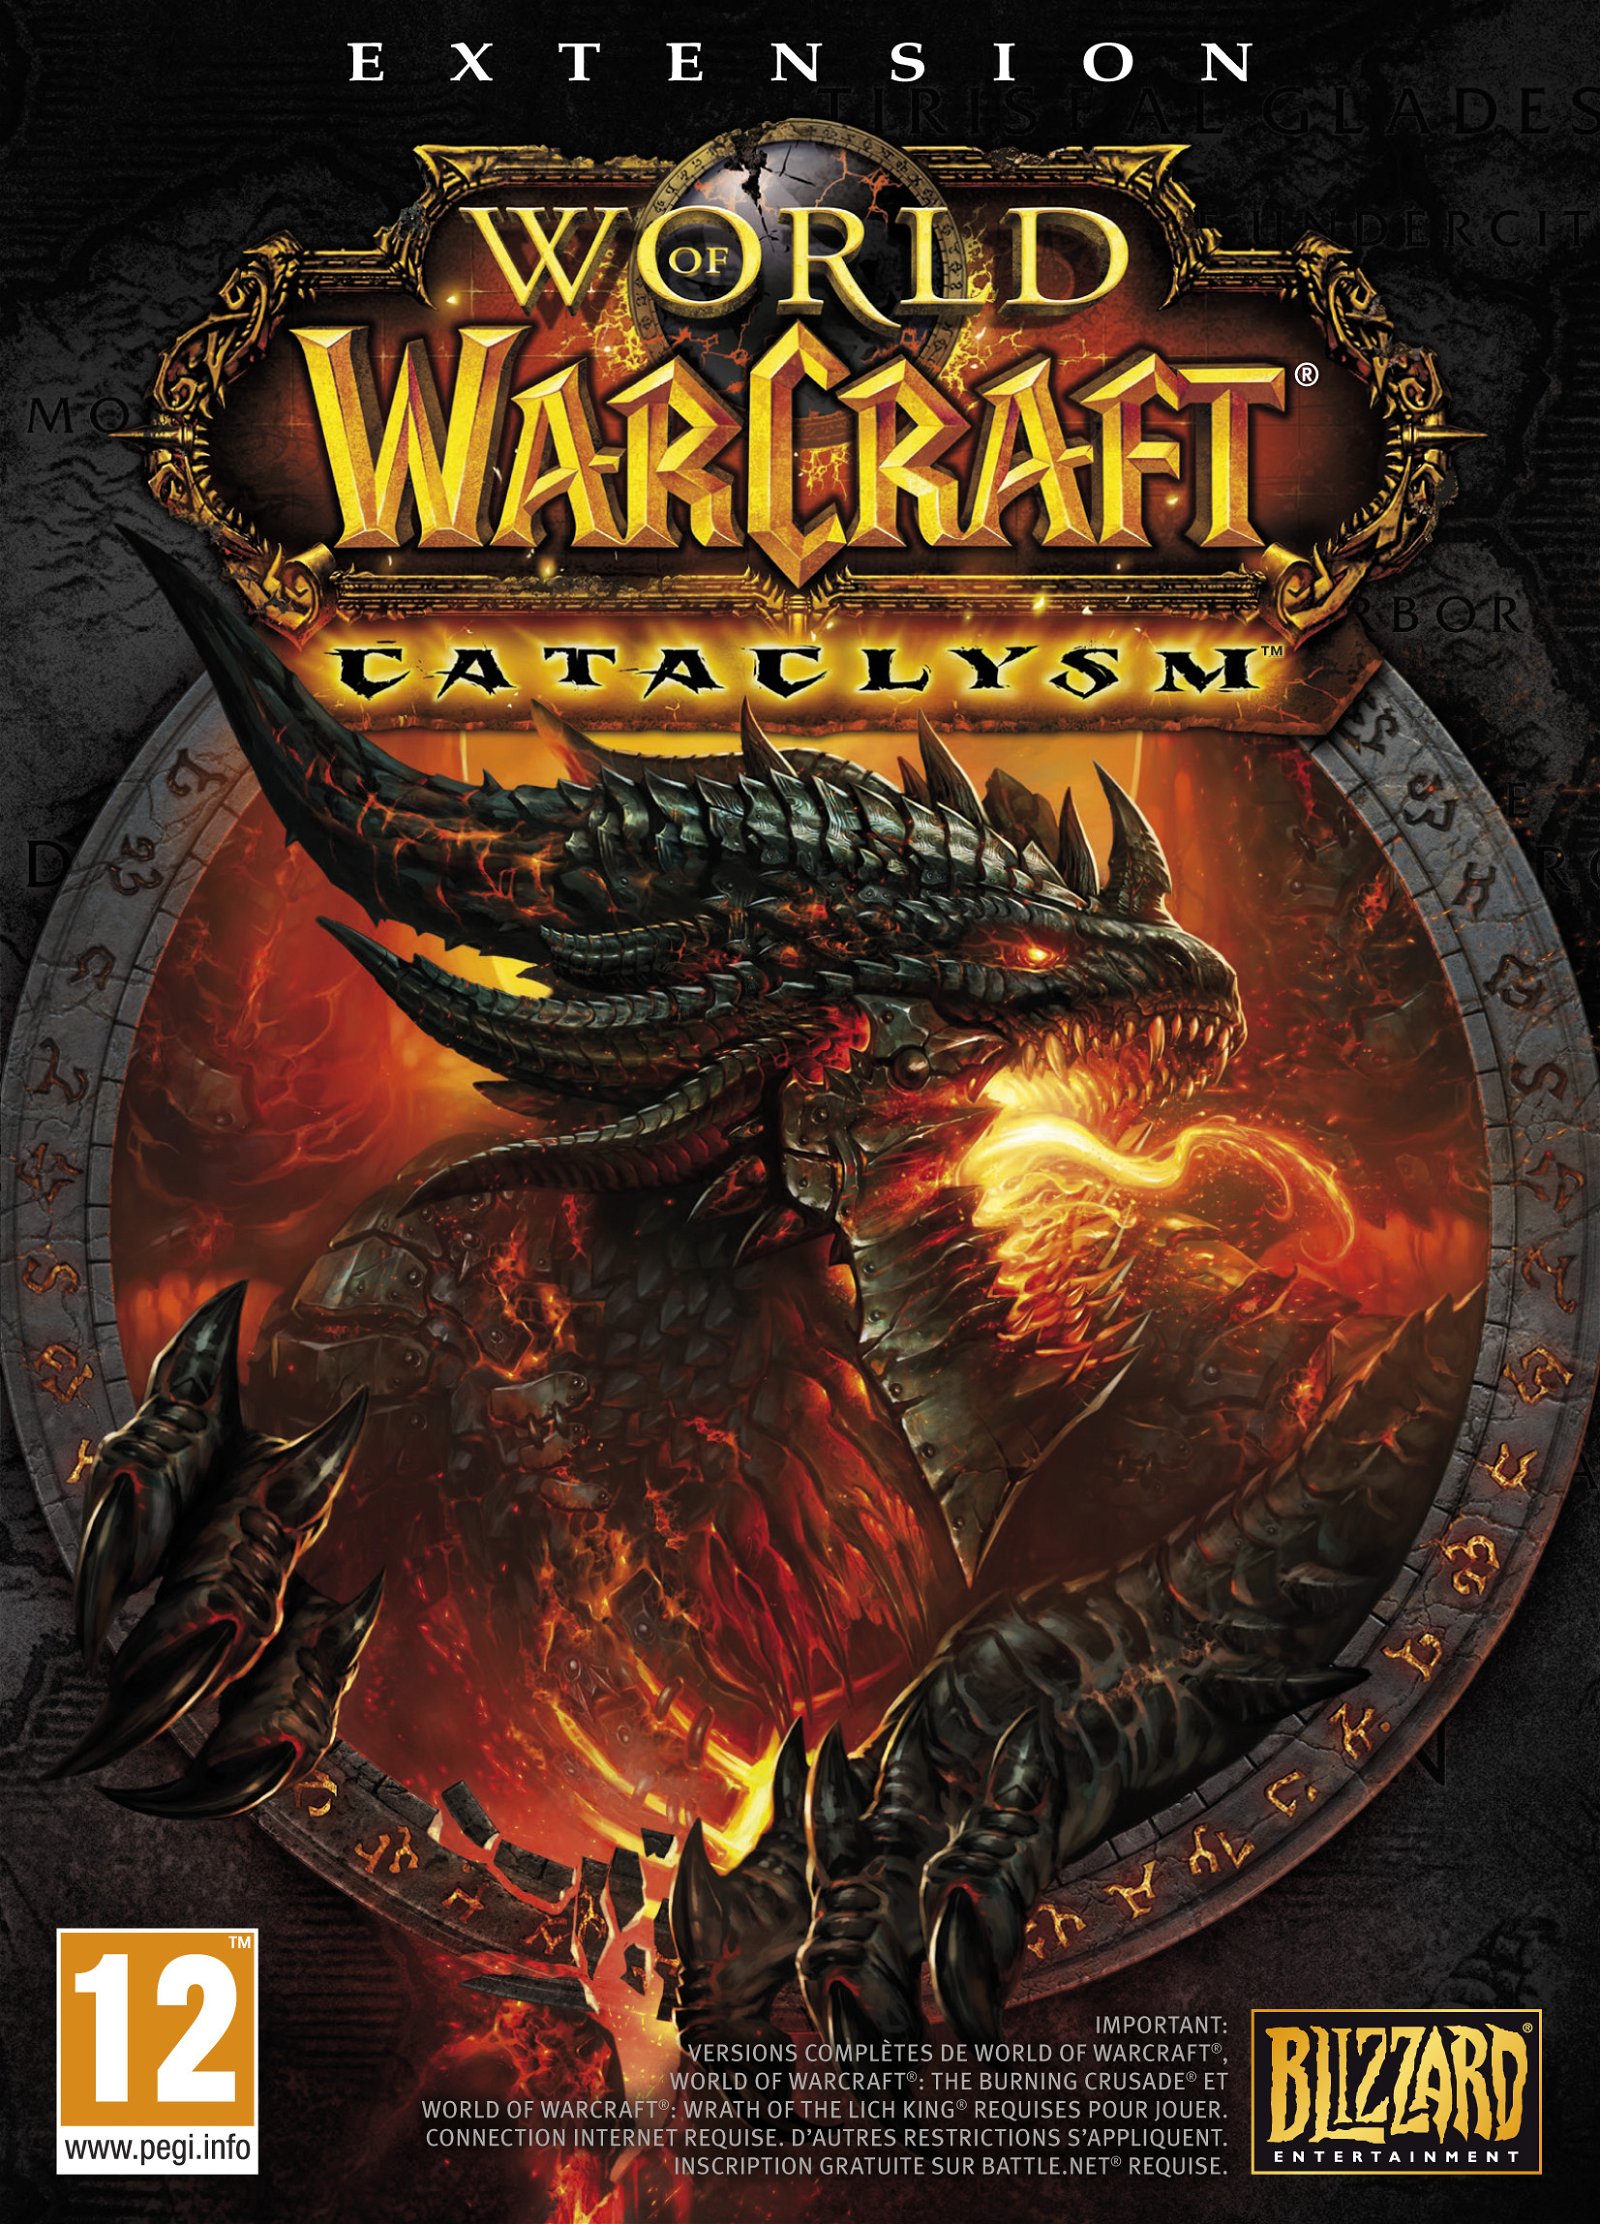 World of Warcraft: Cataclysm (PC) Review 2